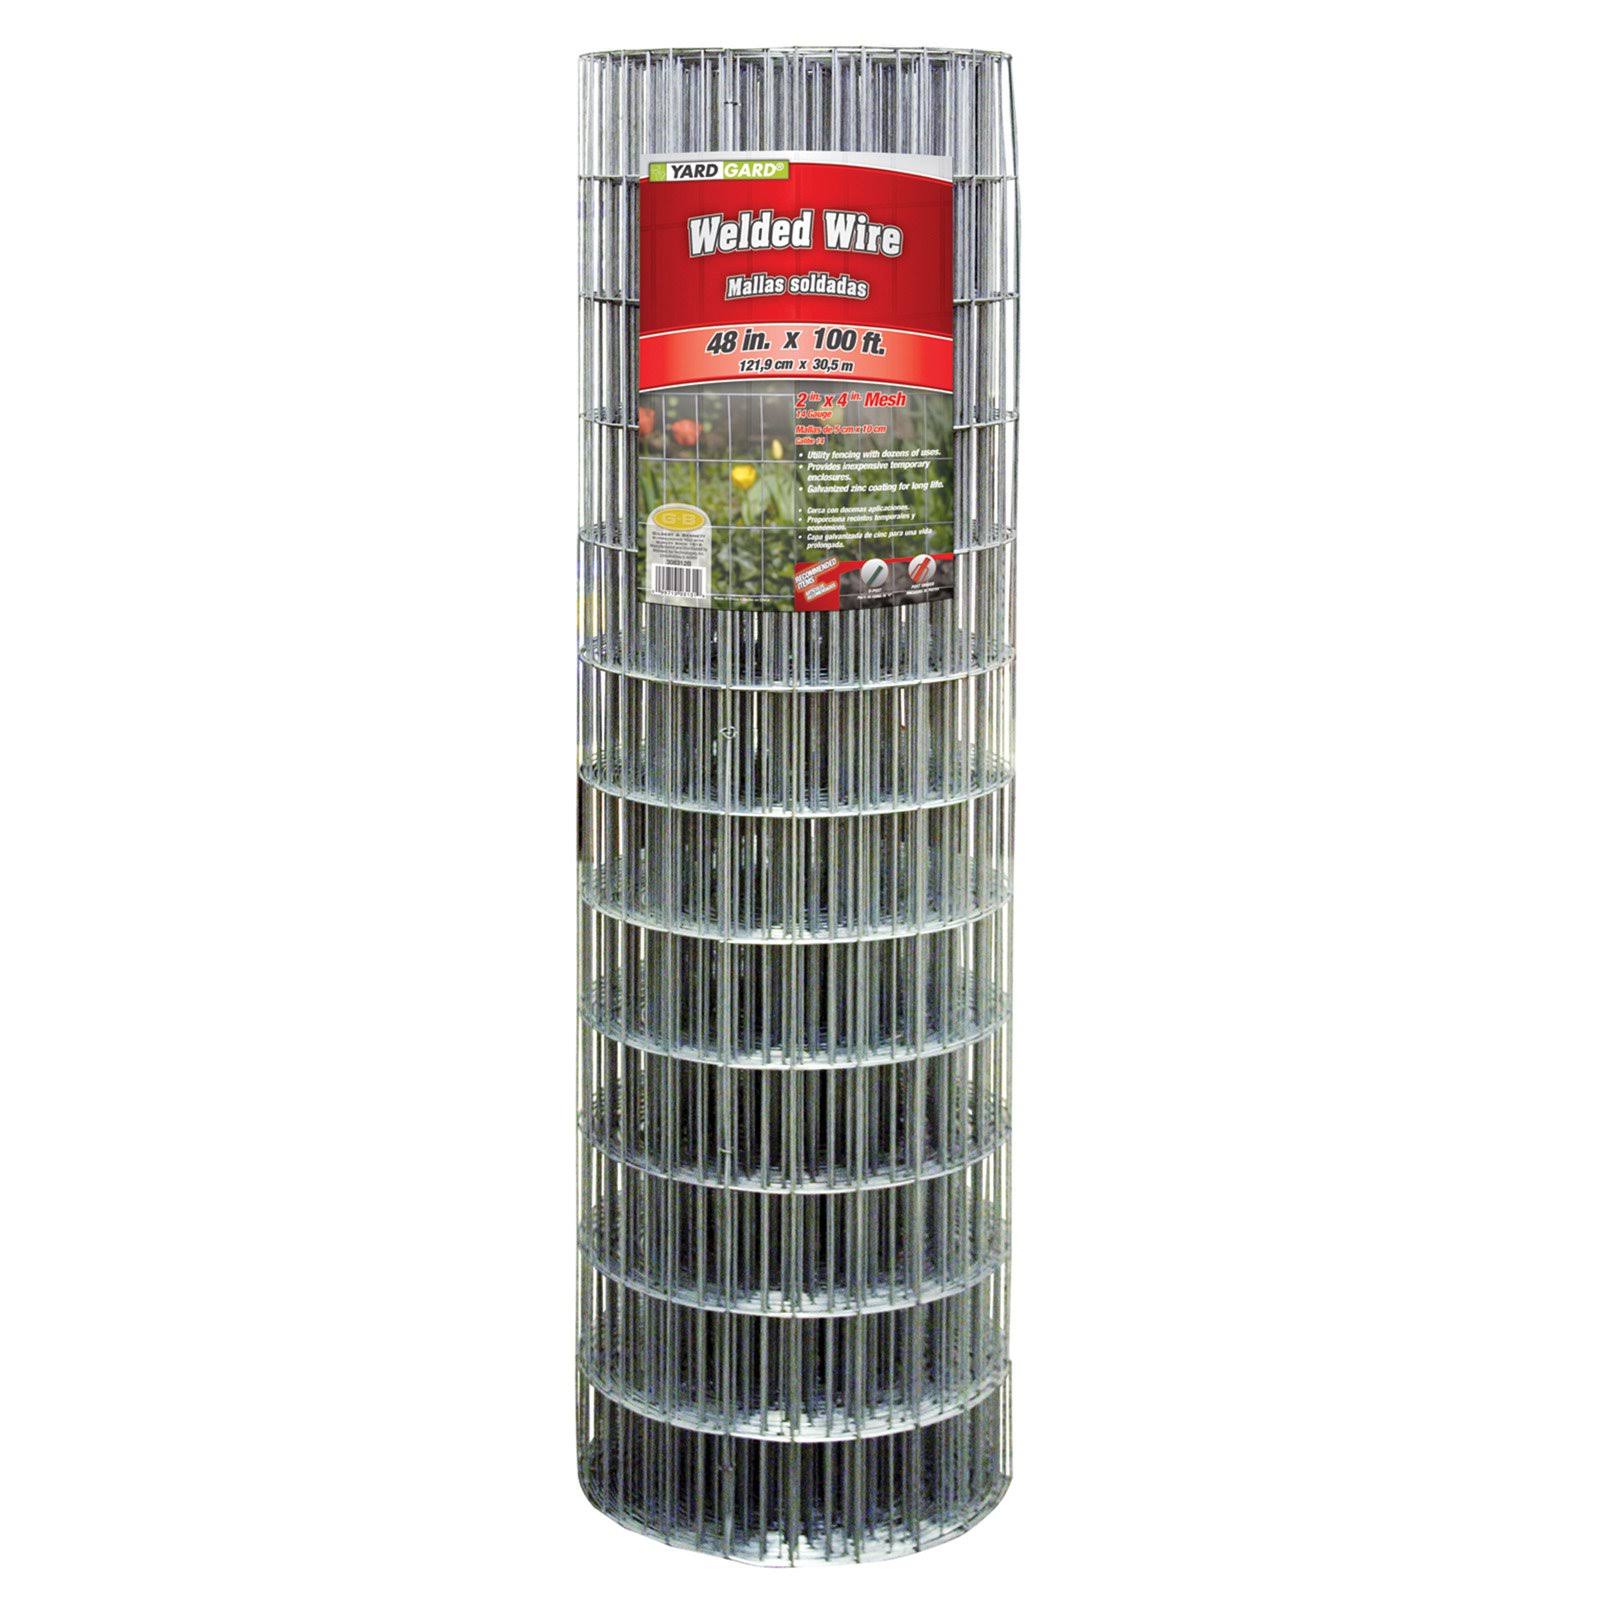 Midwest Air 309224a Galvanized Welded Wire - 48" x 100'